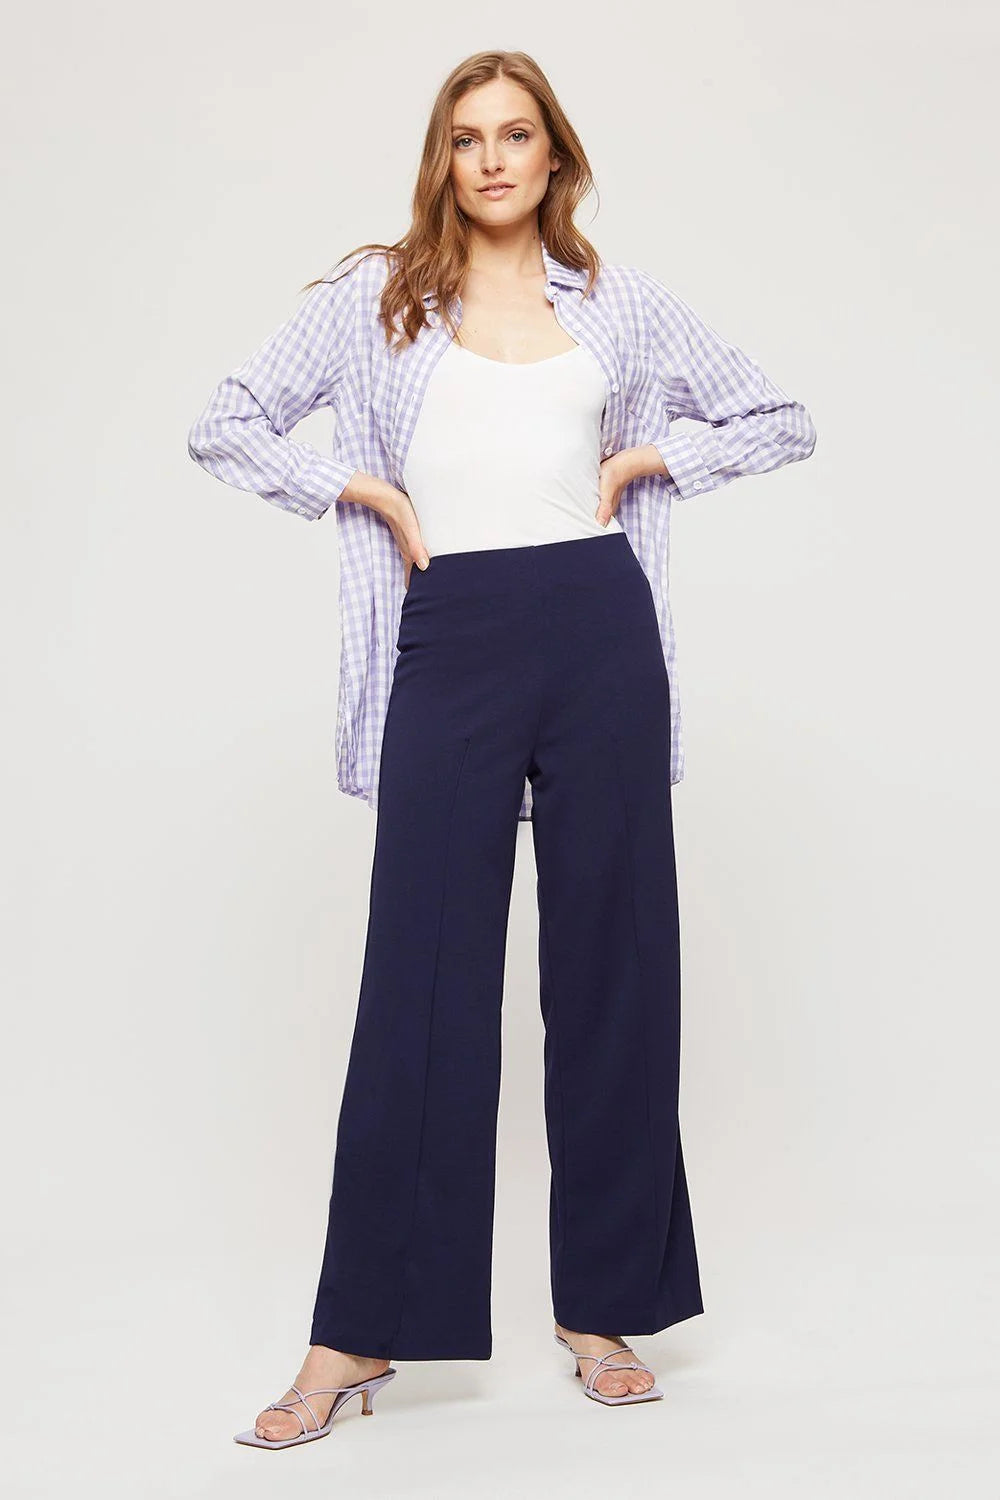 Dorothy Perkins Pull On Wide Leg Trousers Navy / 6